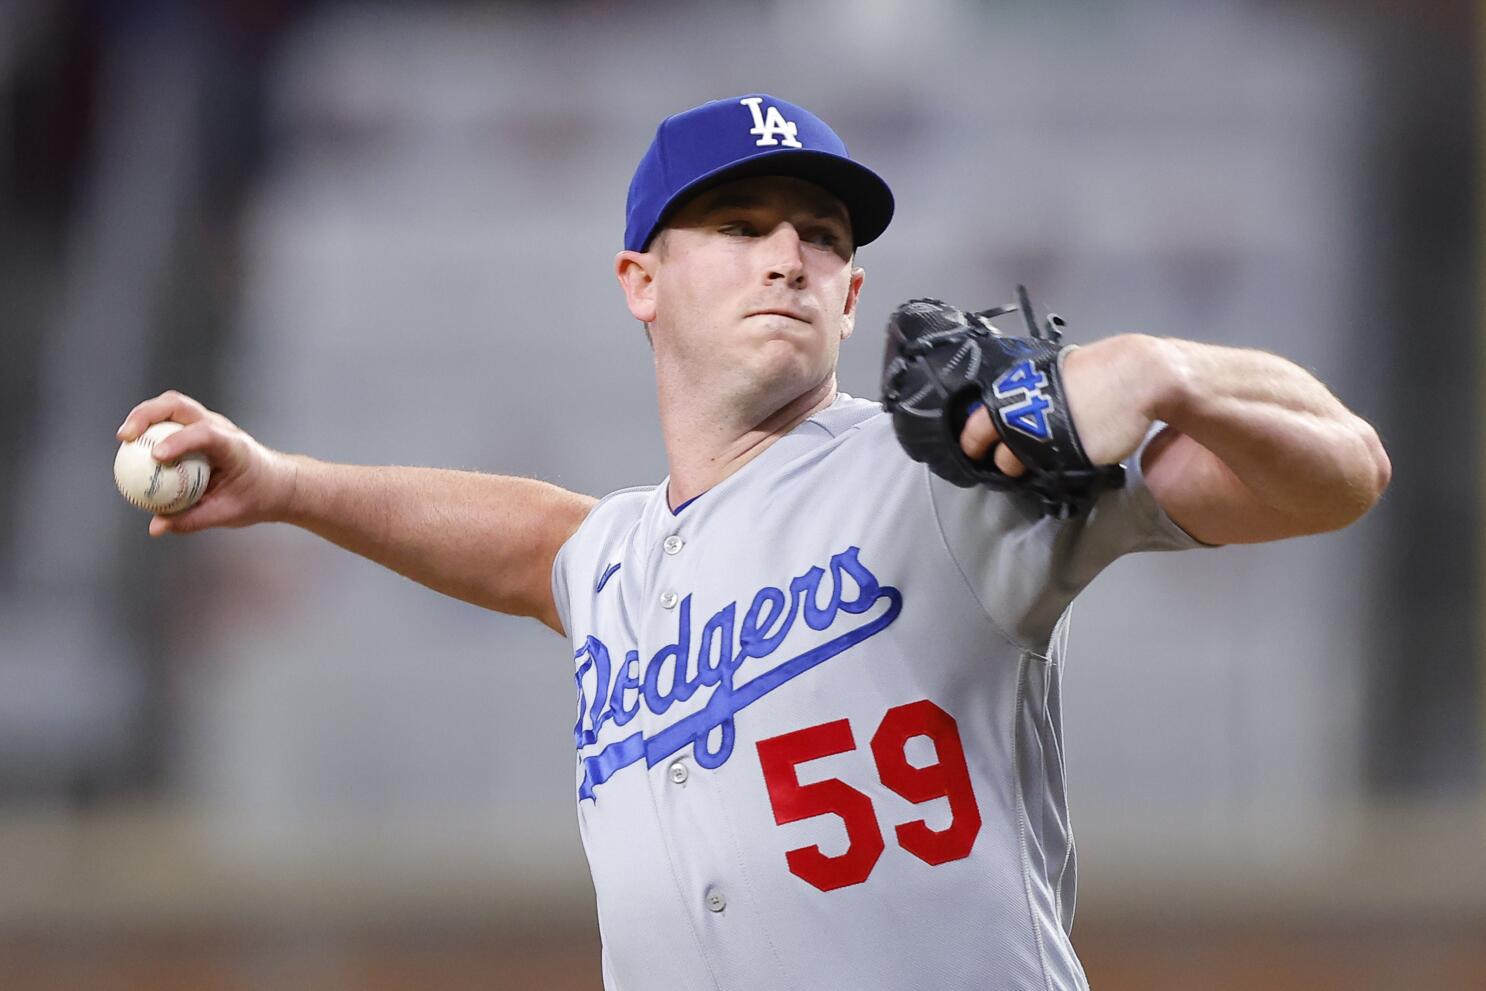 Play Ball!: The Dodgers have plenty of promotions this summer, Sports